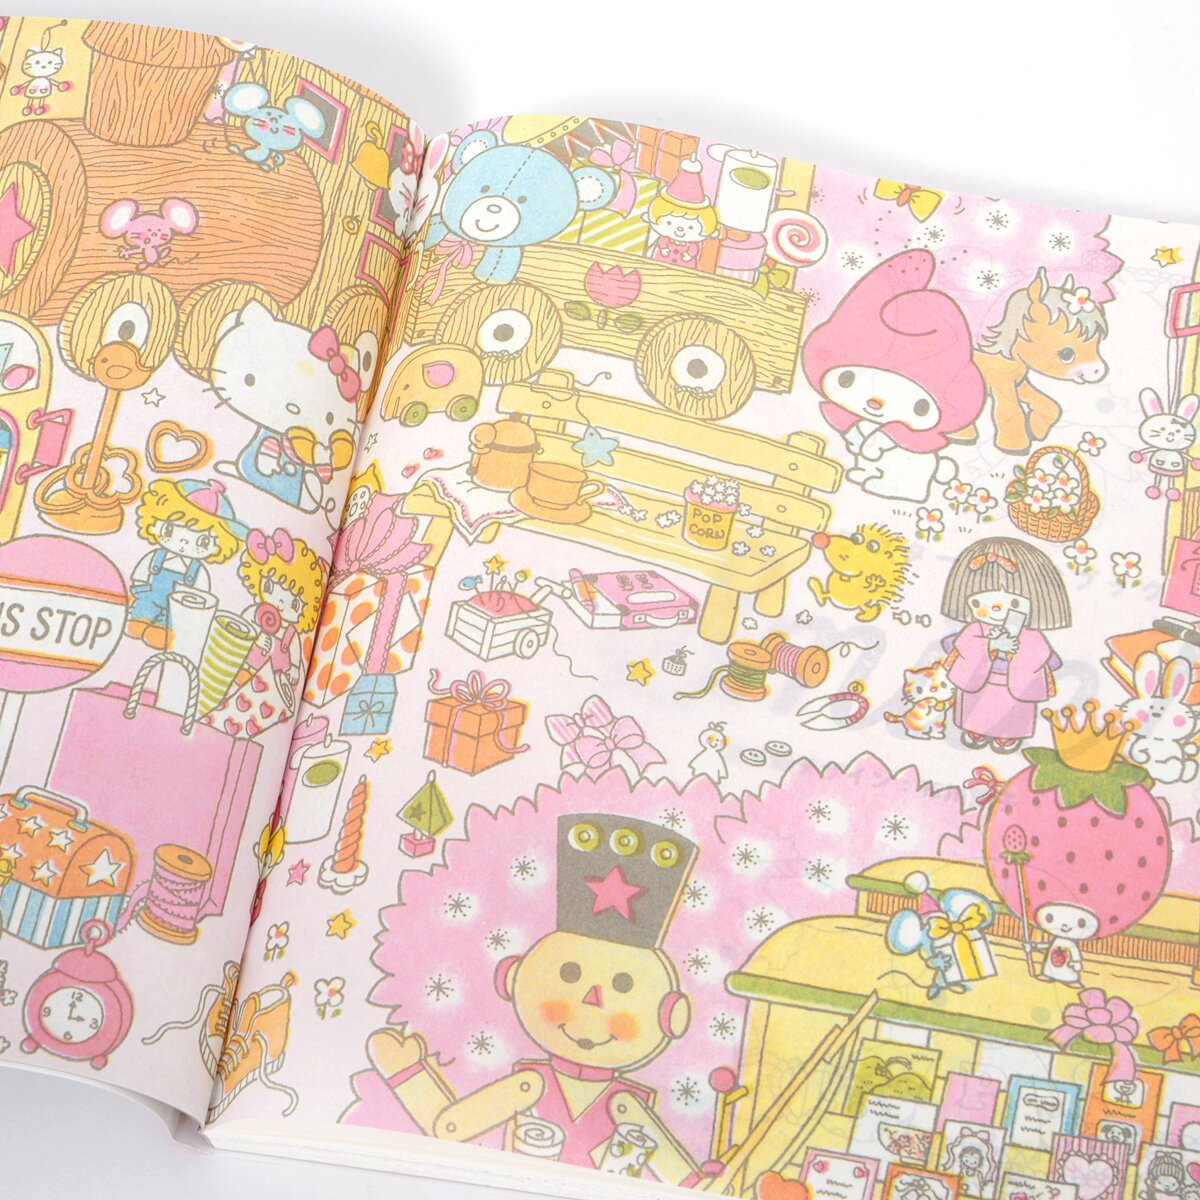 Sanrio Character Coloring Book: Smile! Hello Kitty, My melody, Little Twin  Stars